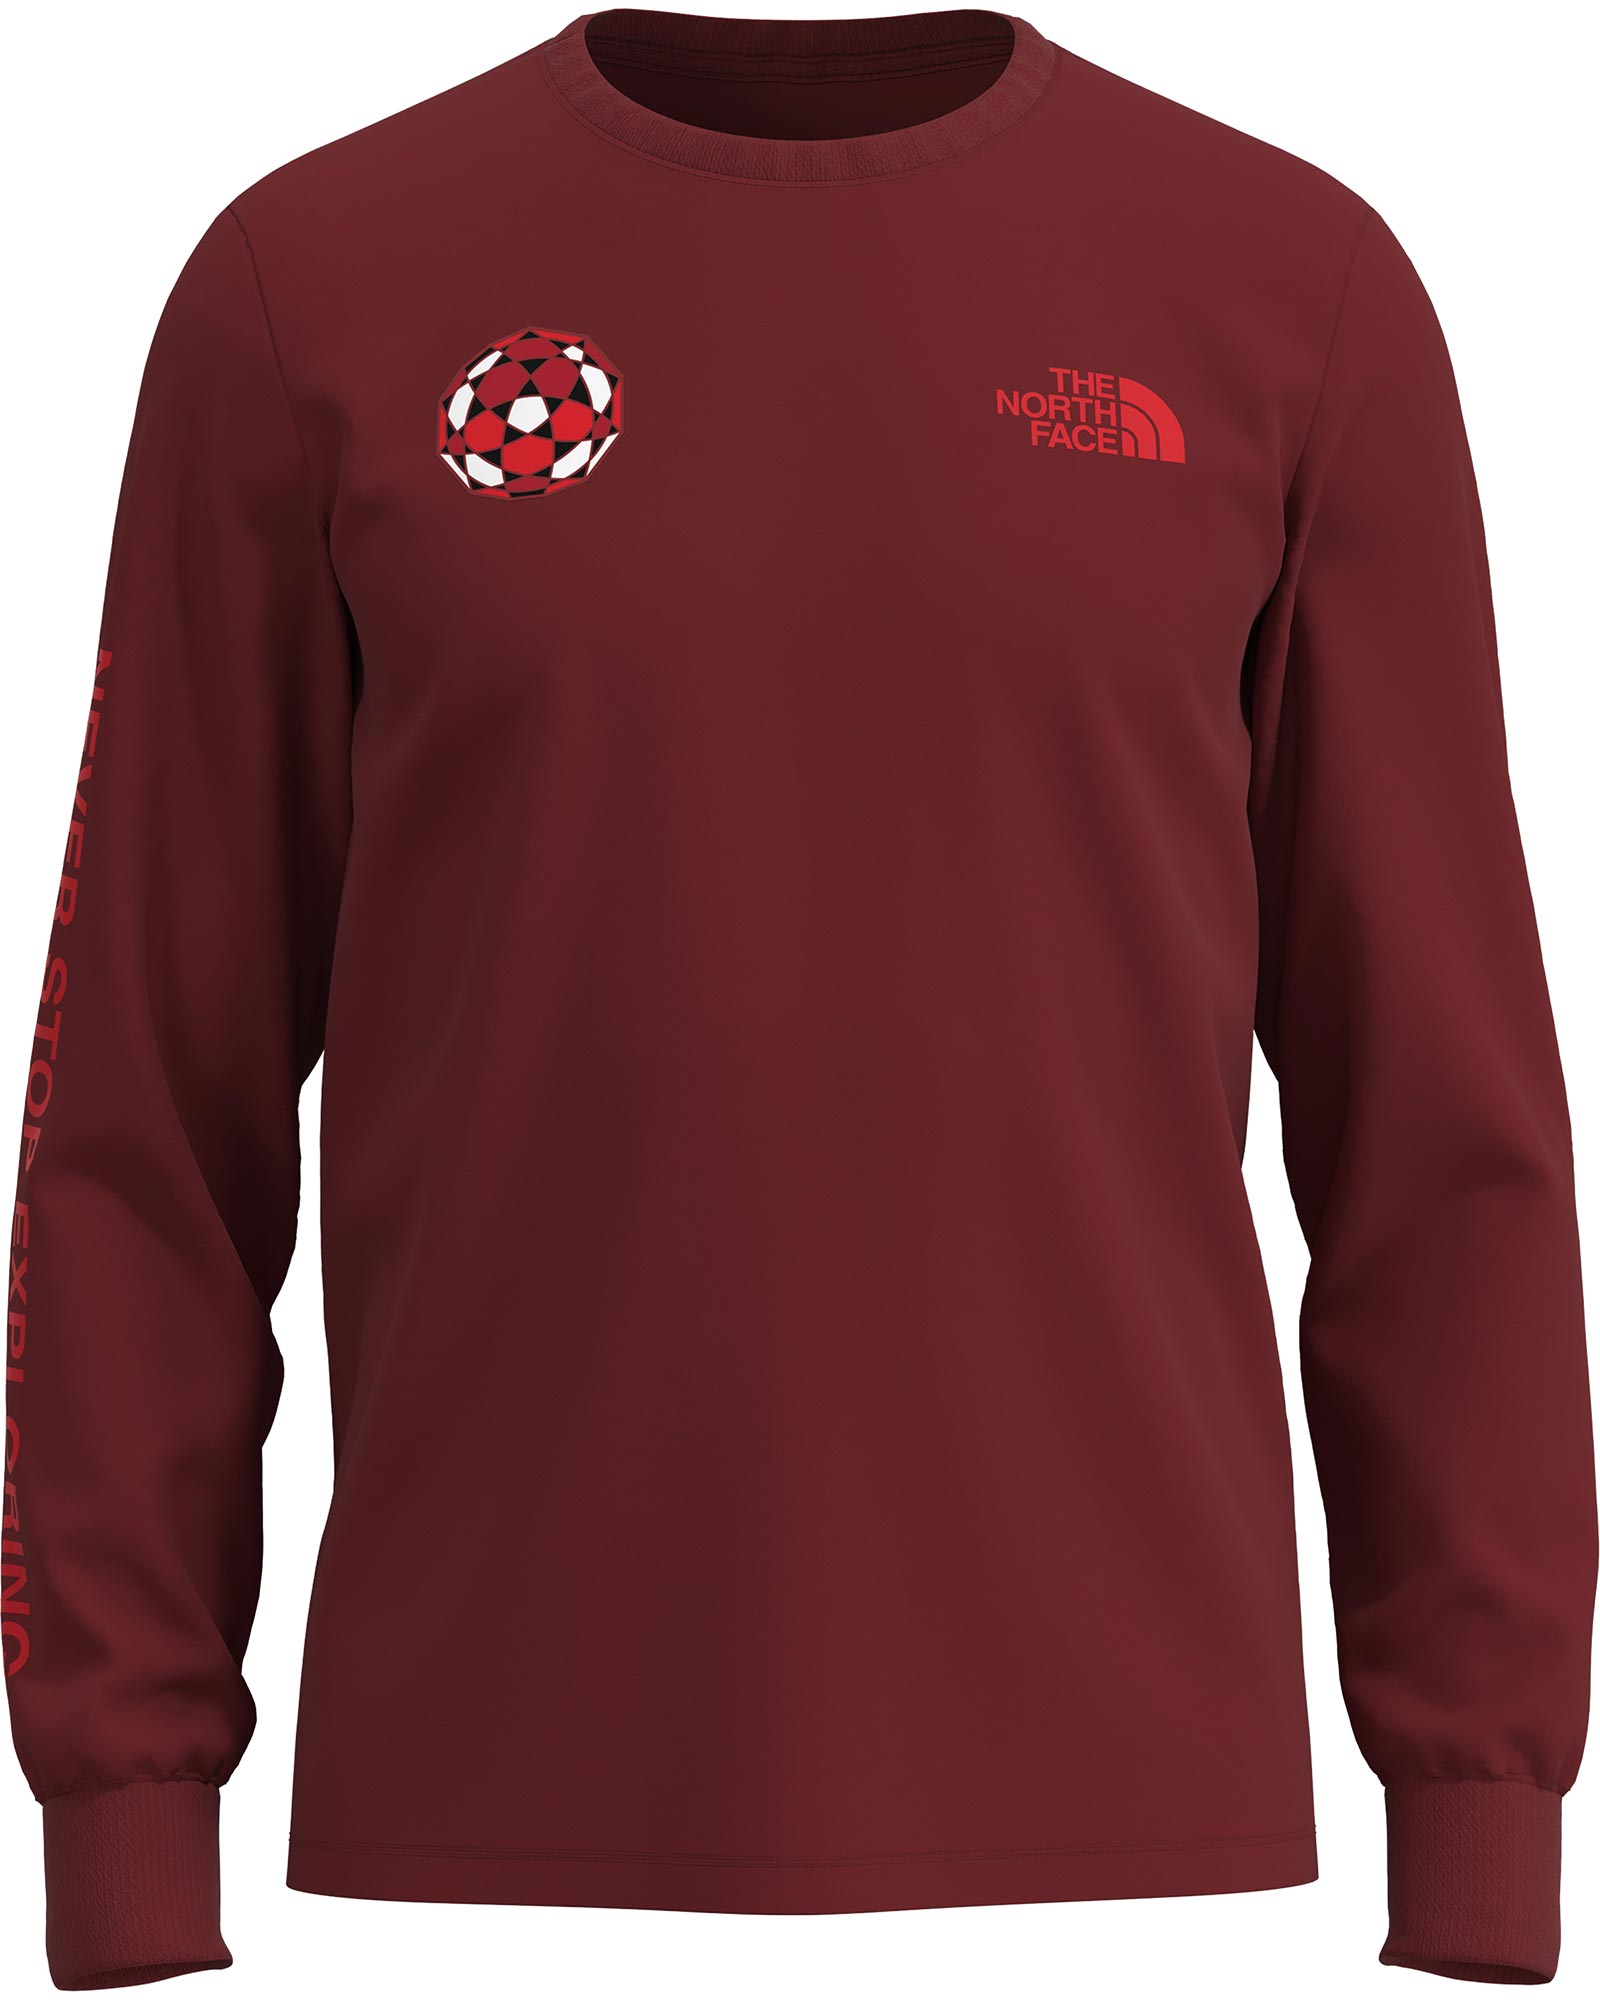 The North Face IC Men’s Long Sleeve T Shirt - Cardinal Red S